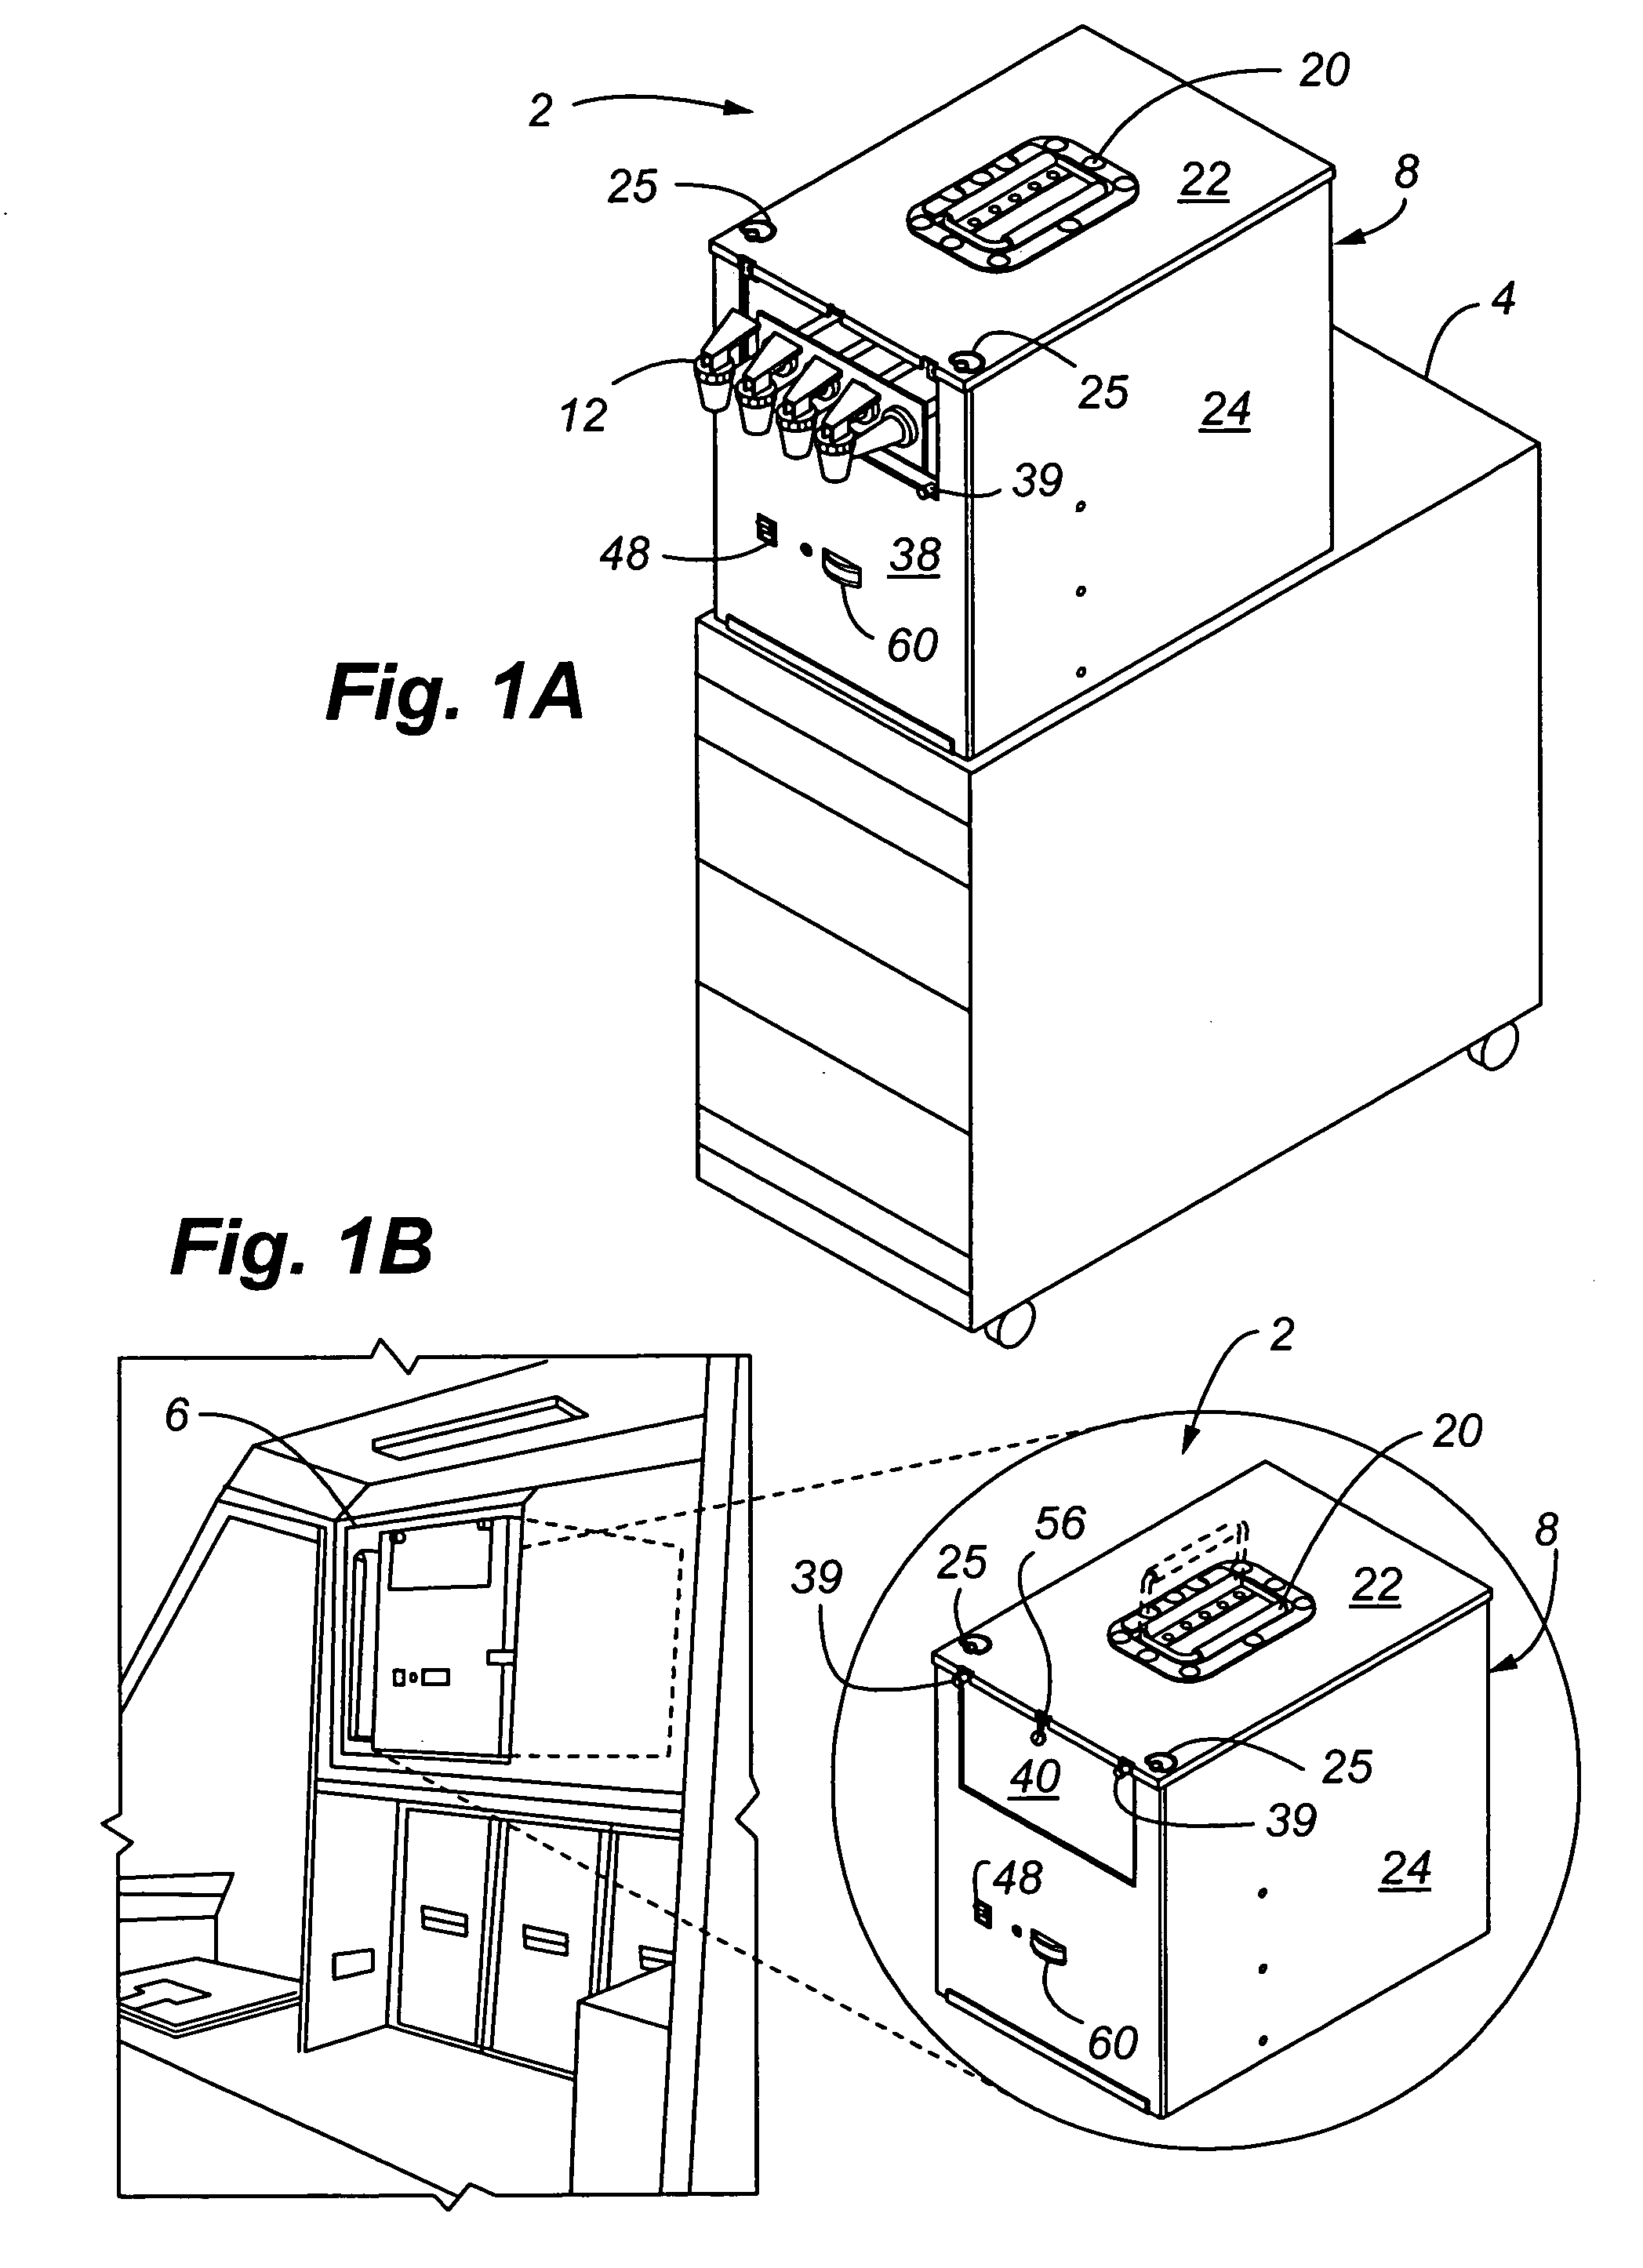 Self-contained beverage dispensing apparatus